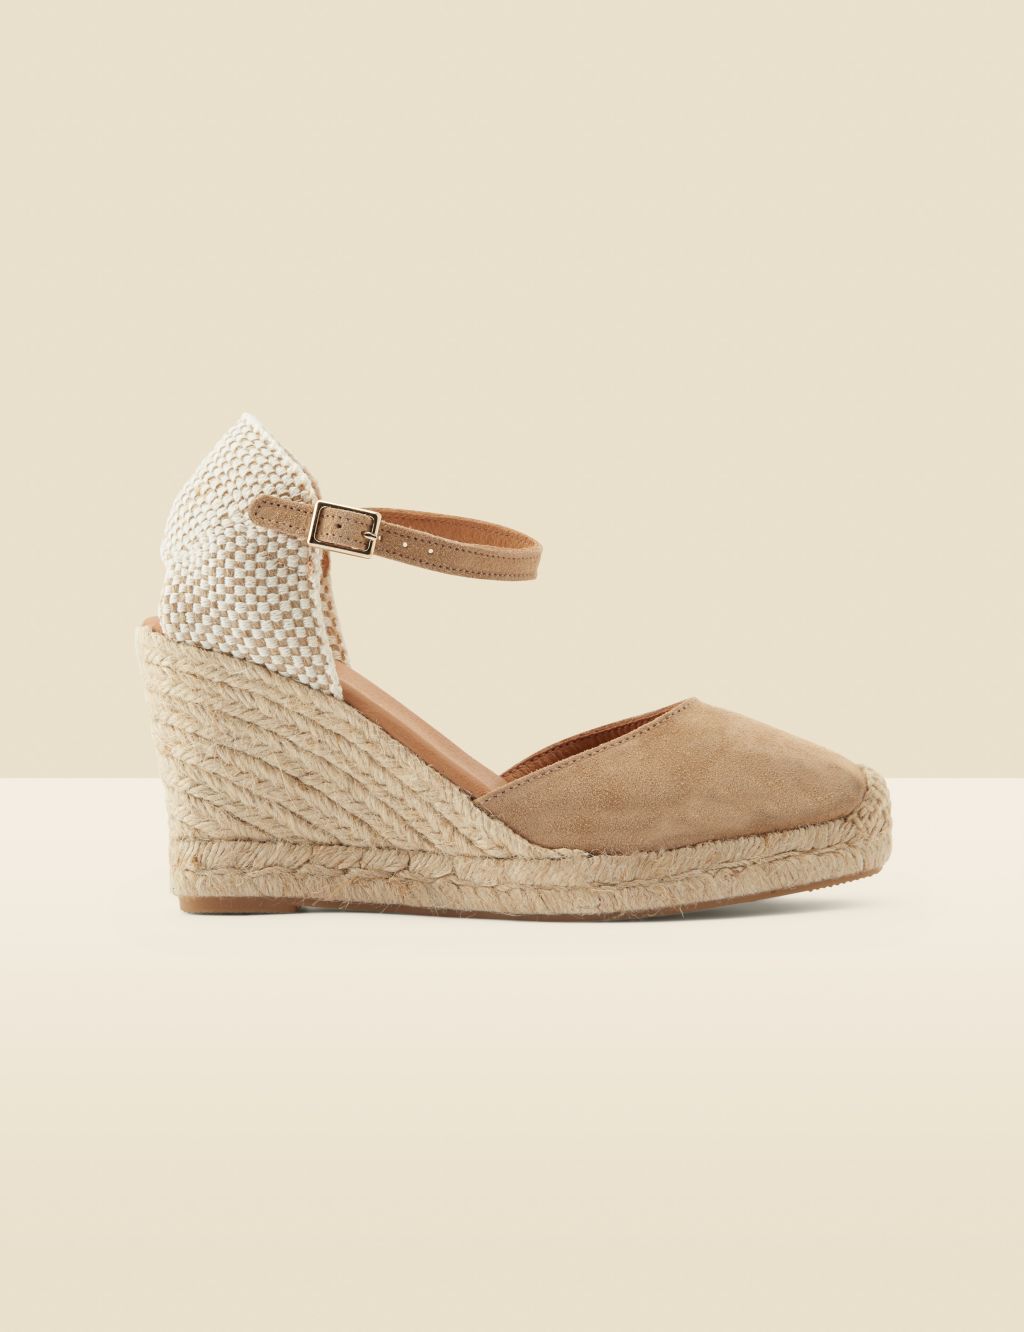 Suede Buckle Ankle Strap Wedge Espadrilles image 2